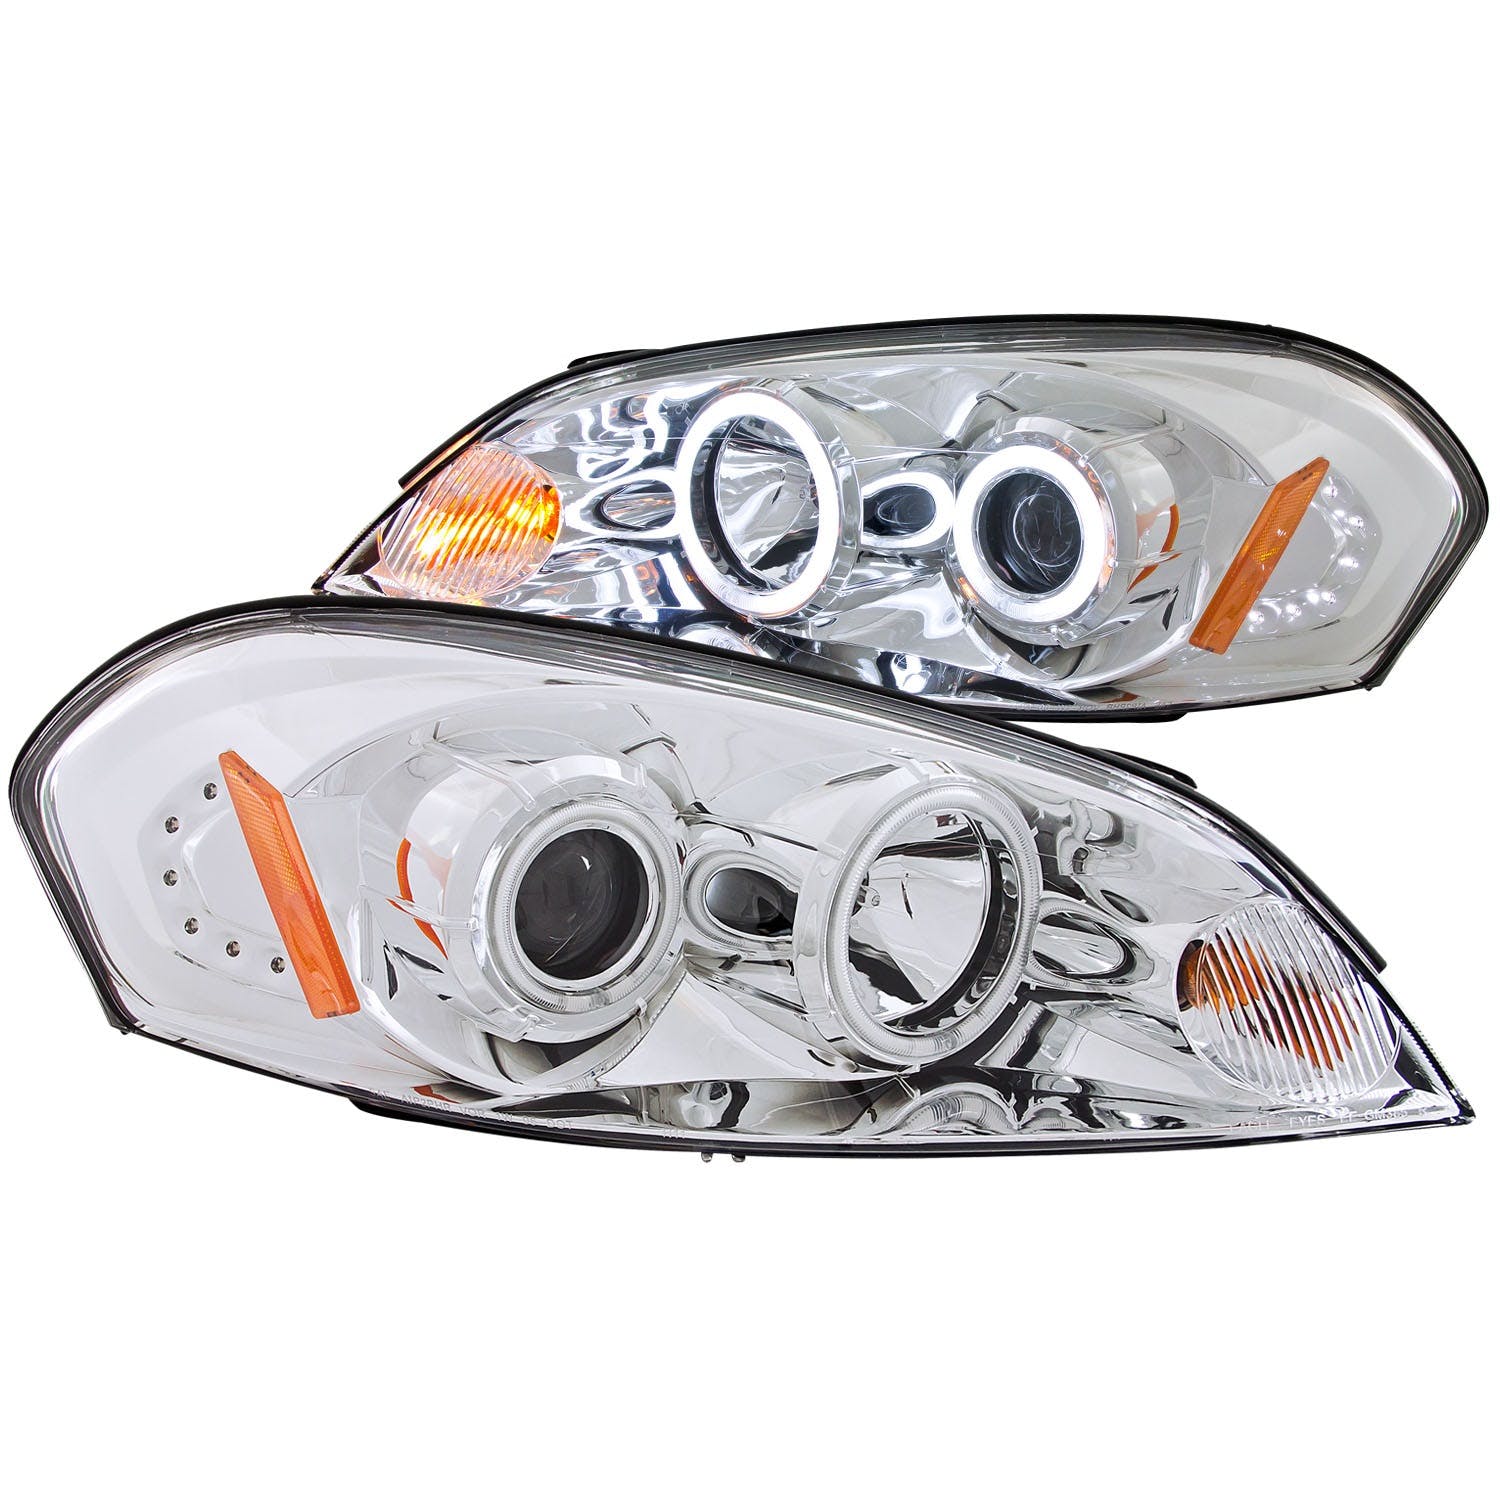 AnzoUSA 121237 Projector Headlights with Halo Chrome